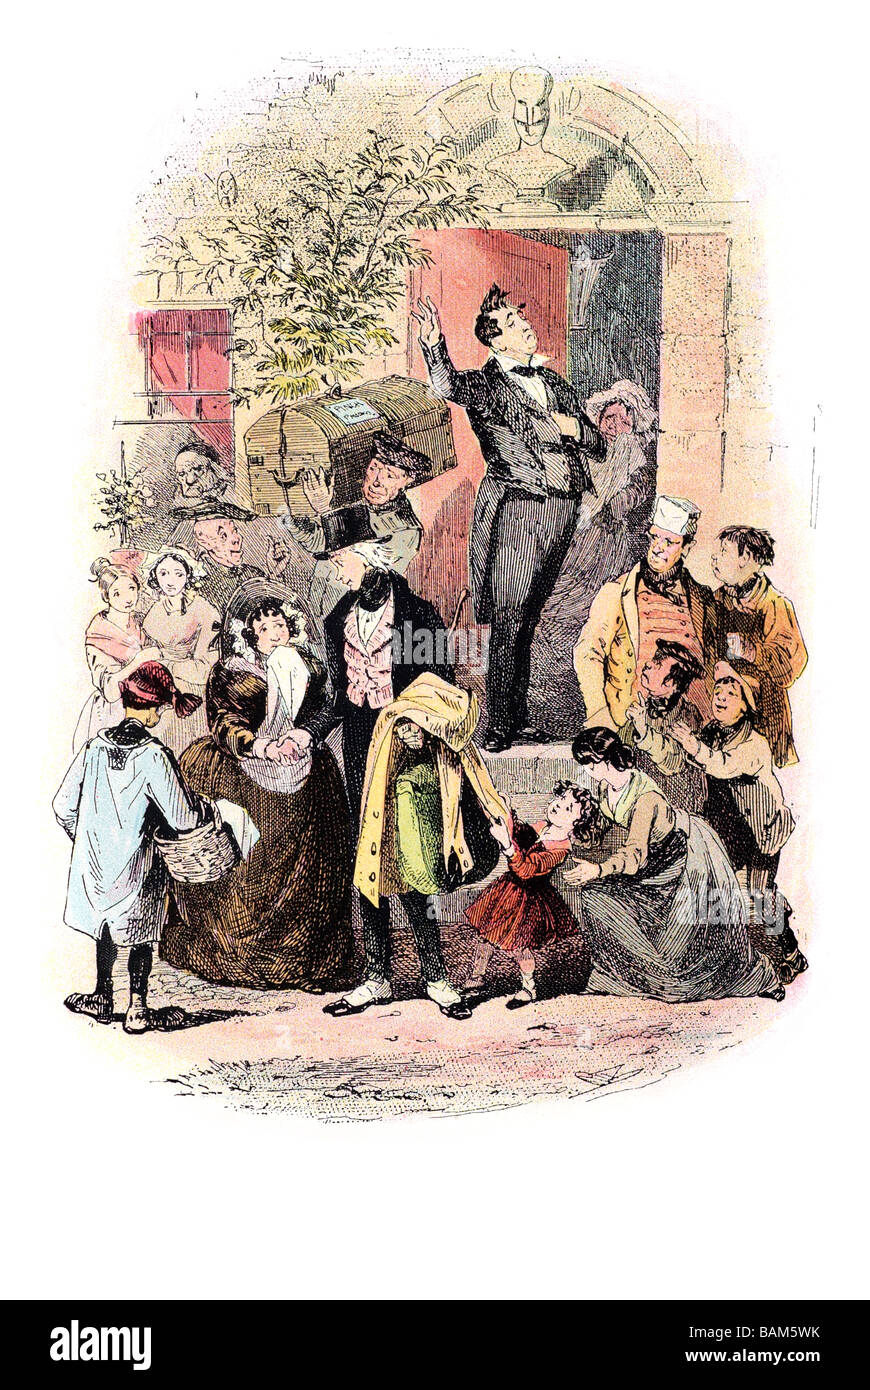 mr pecksniff discharges a duty which he owes to society The Life and Adventures of Martin Chuzzlewit charles dickens Stock Photo